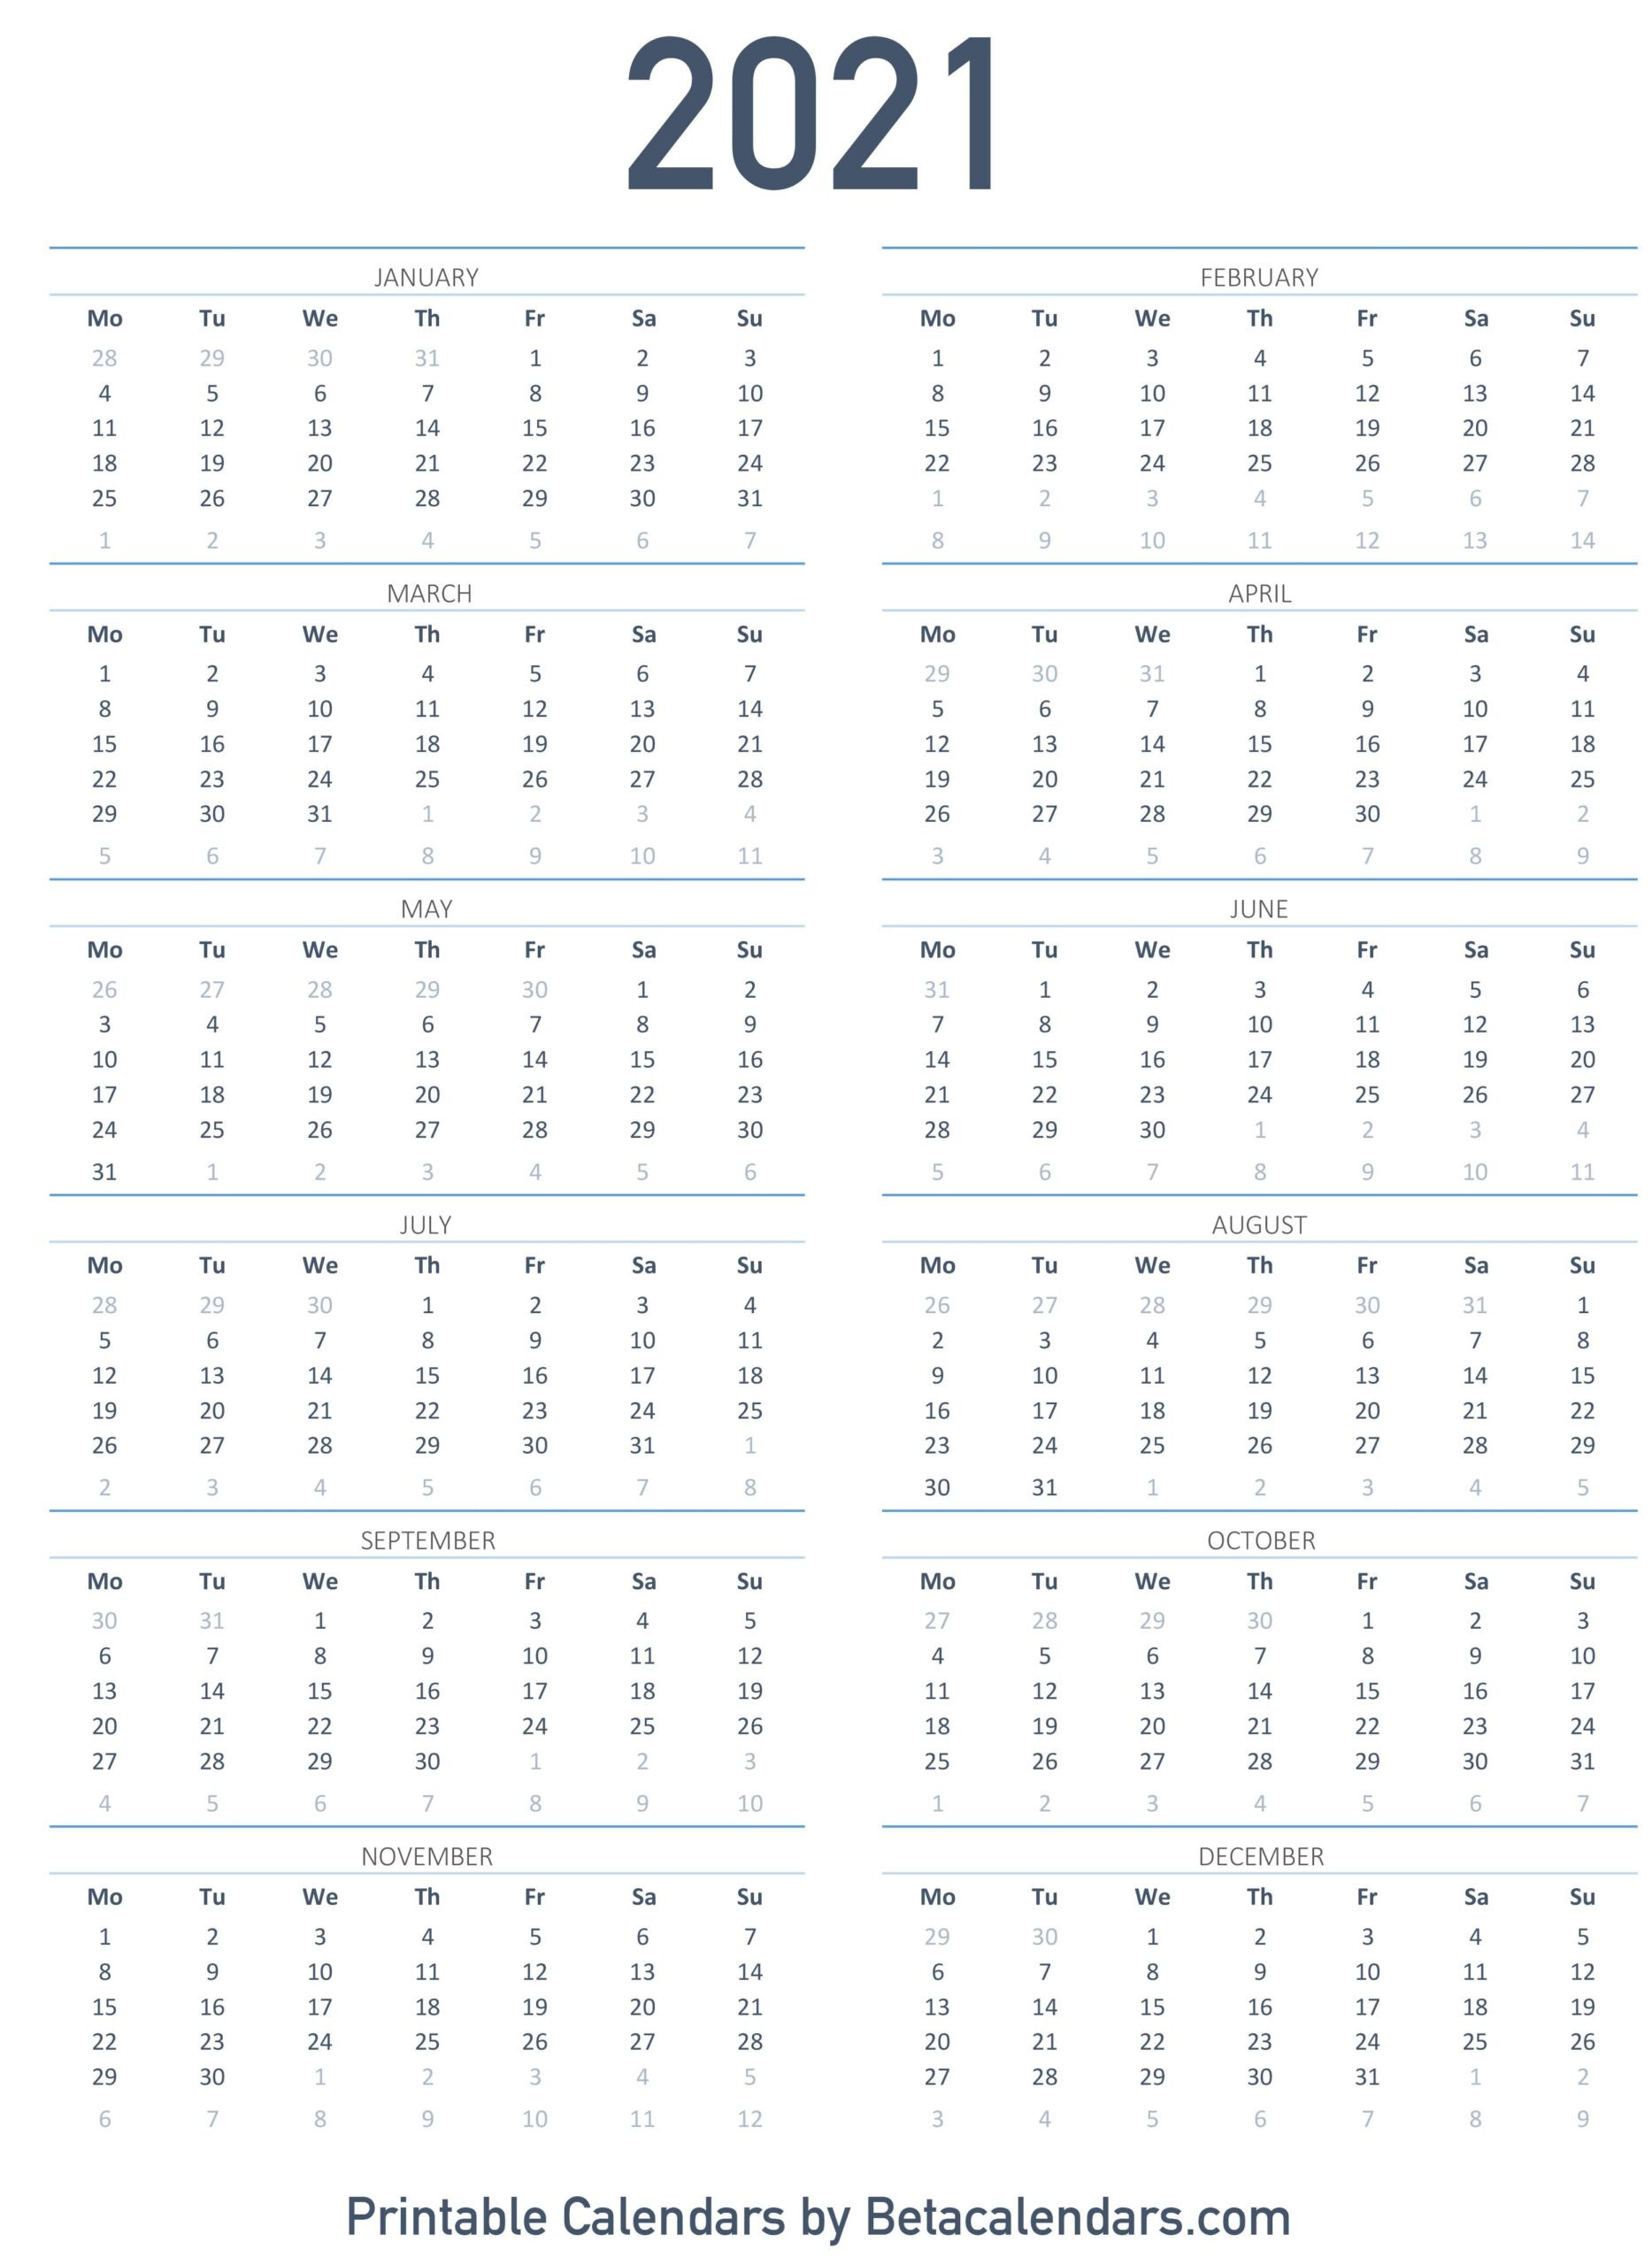 Printable 2021 Monthly Calendar With Pay Periods - Payroll-April 2021 Payroll Calender